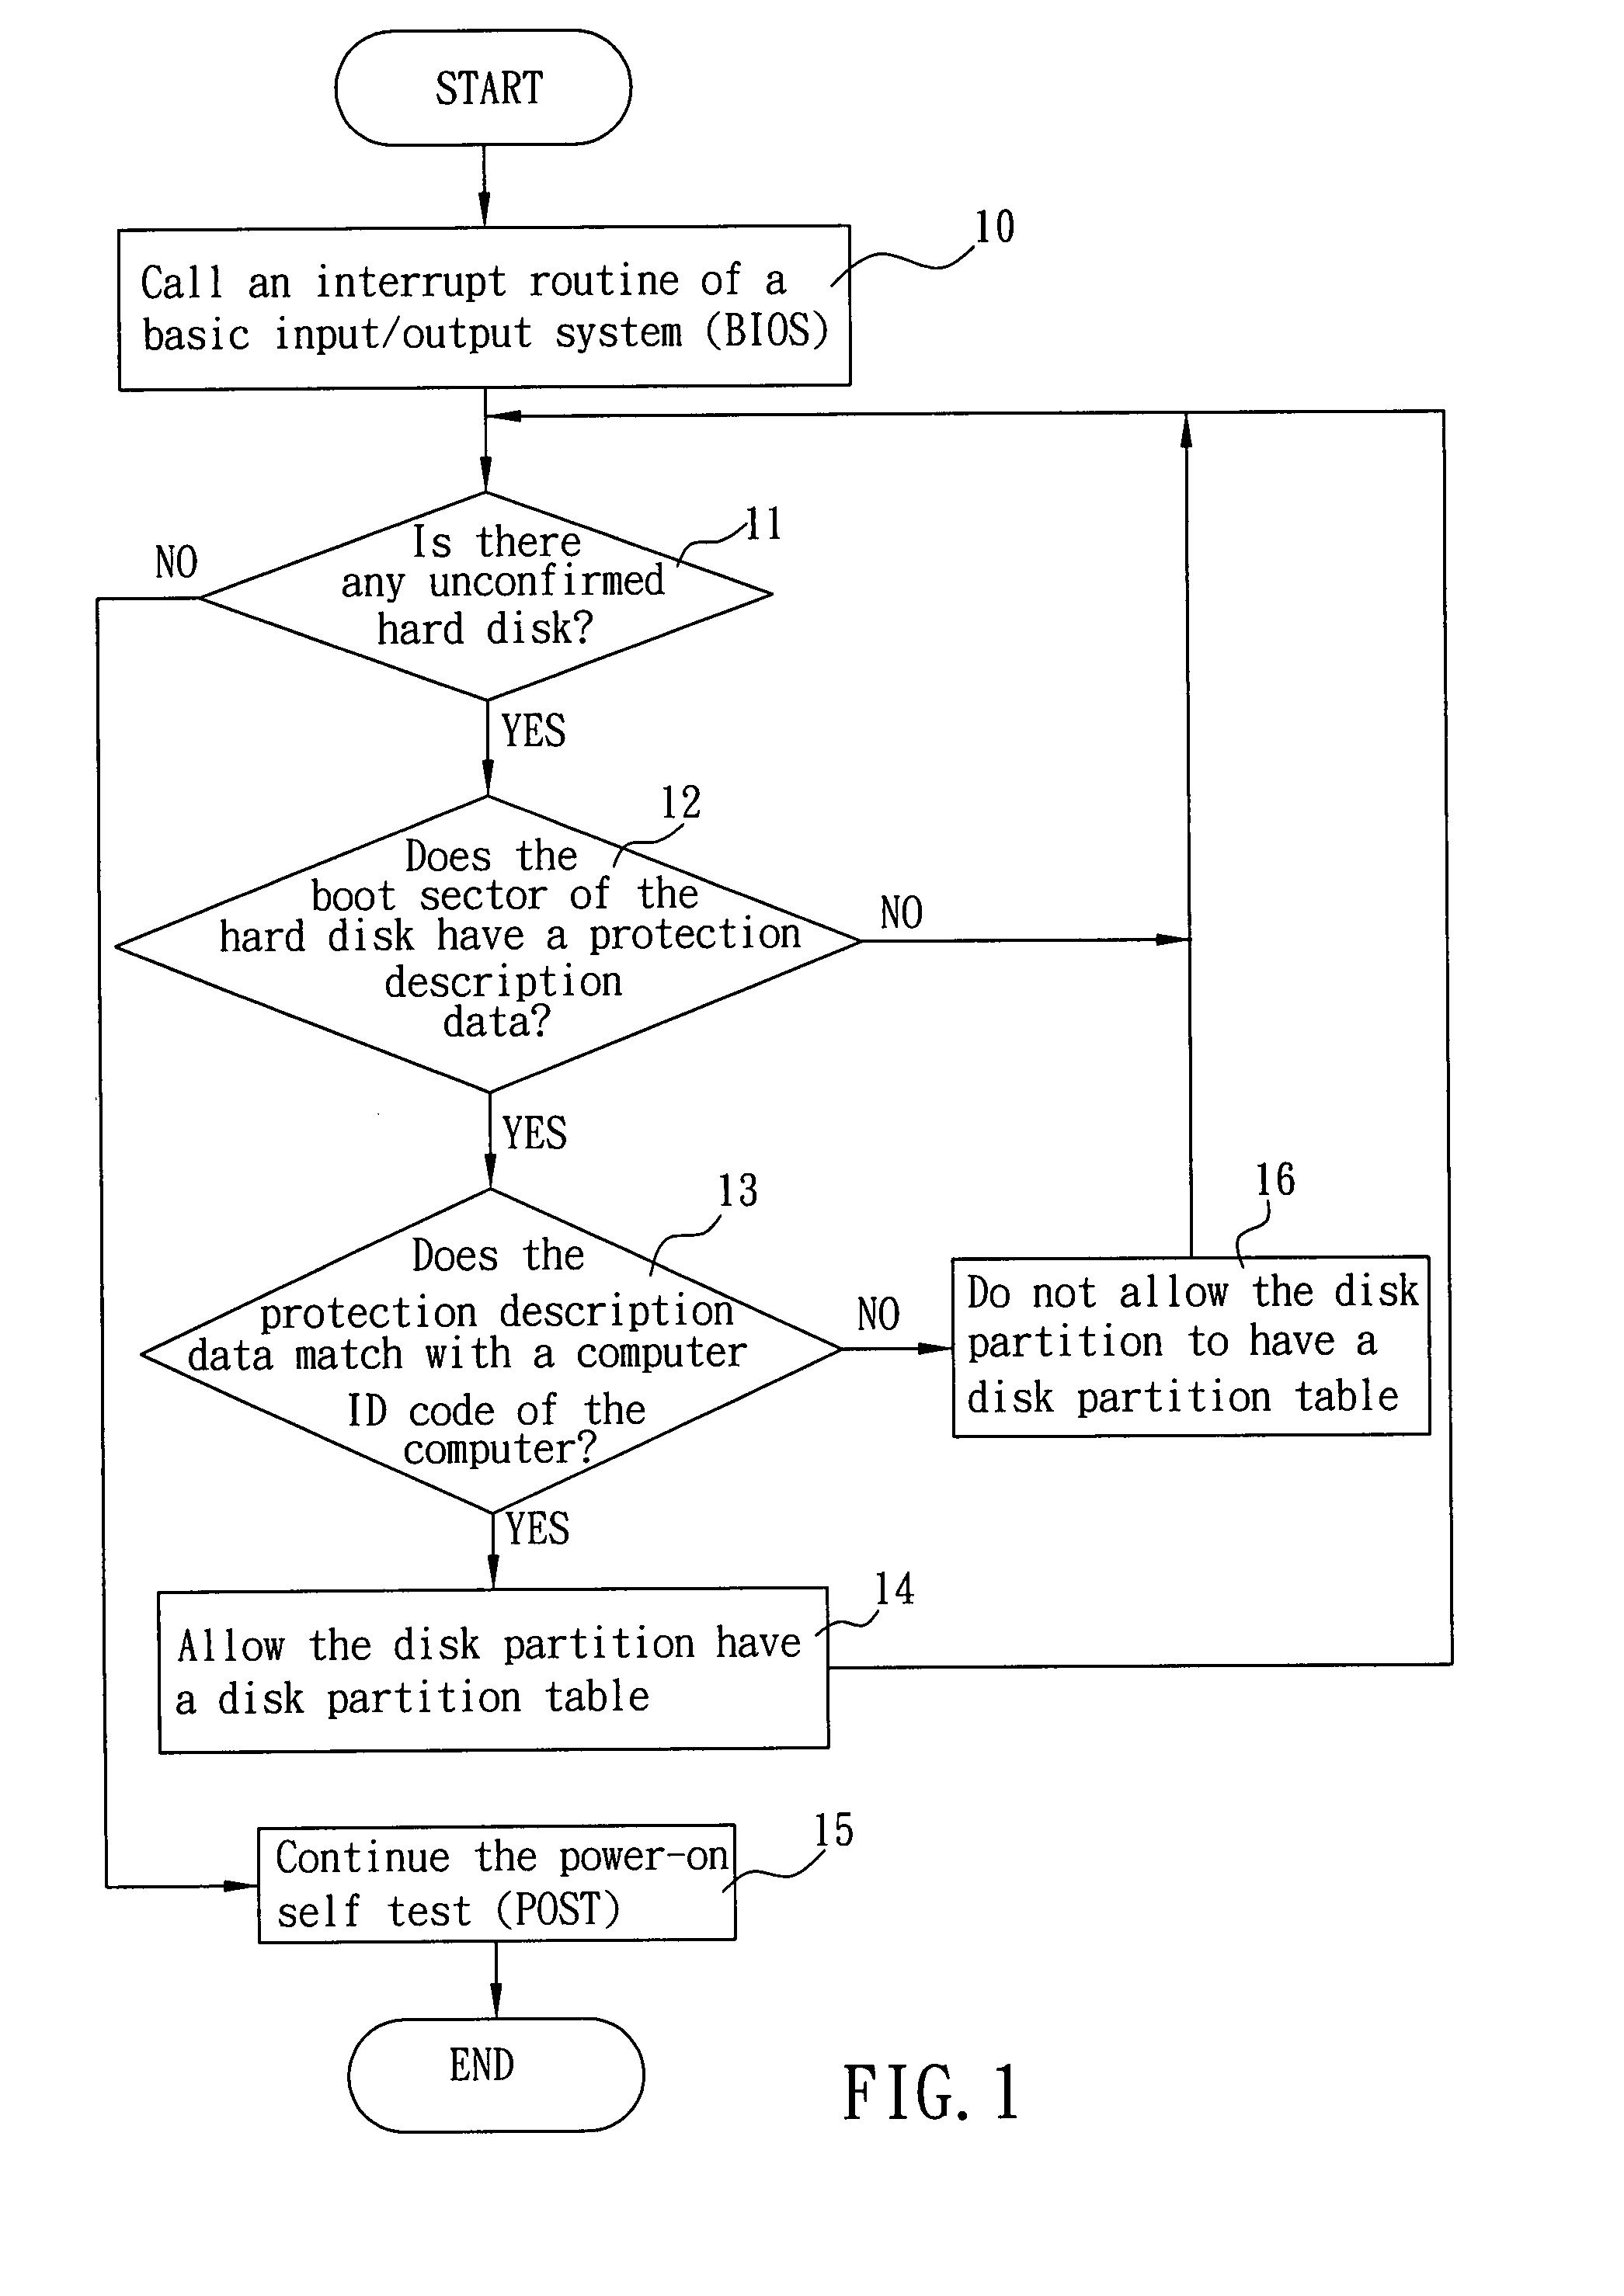 Method for protecting data in a hard disk